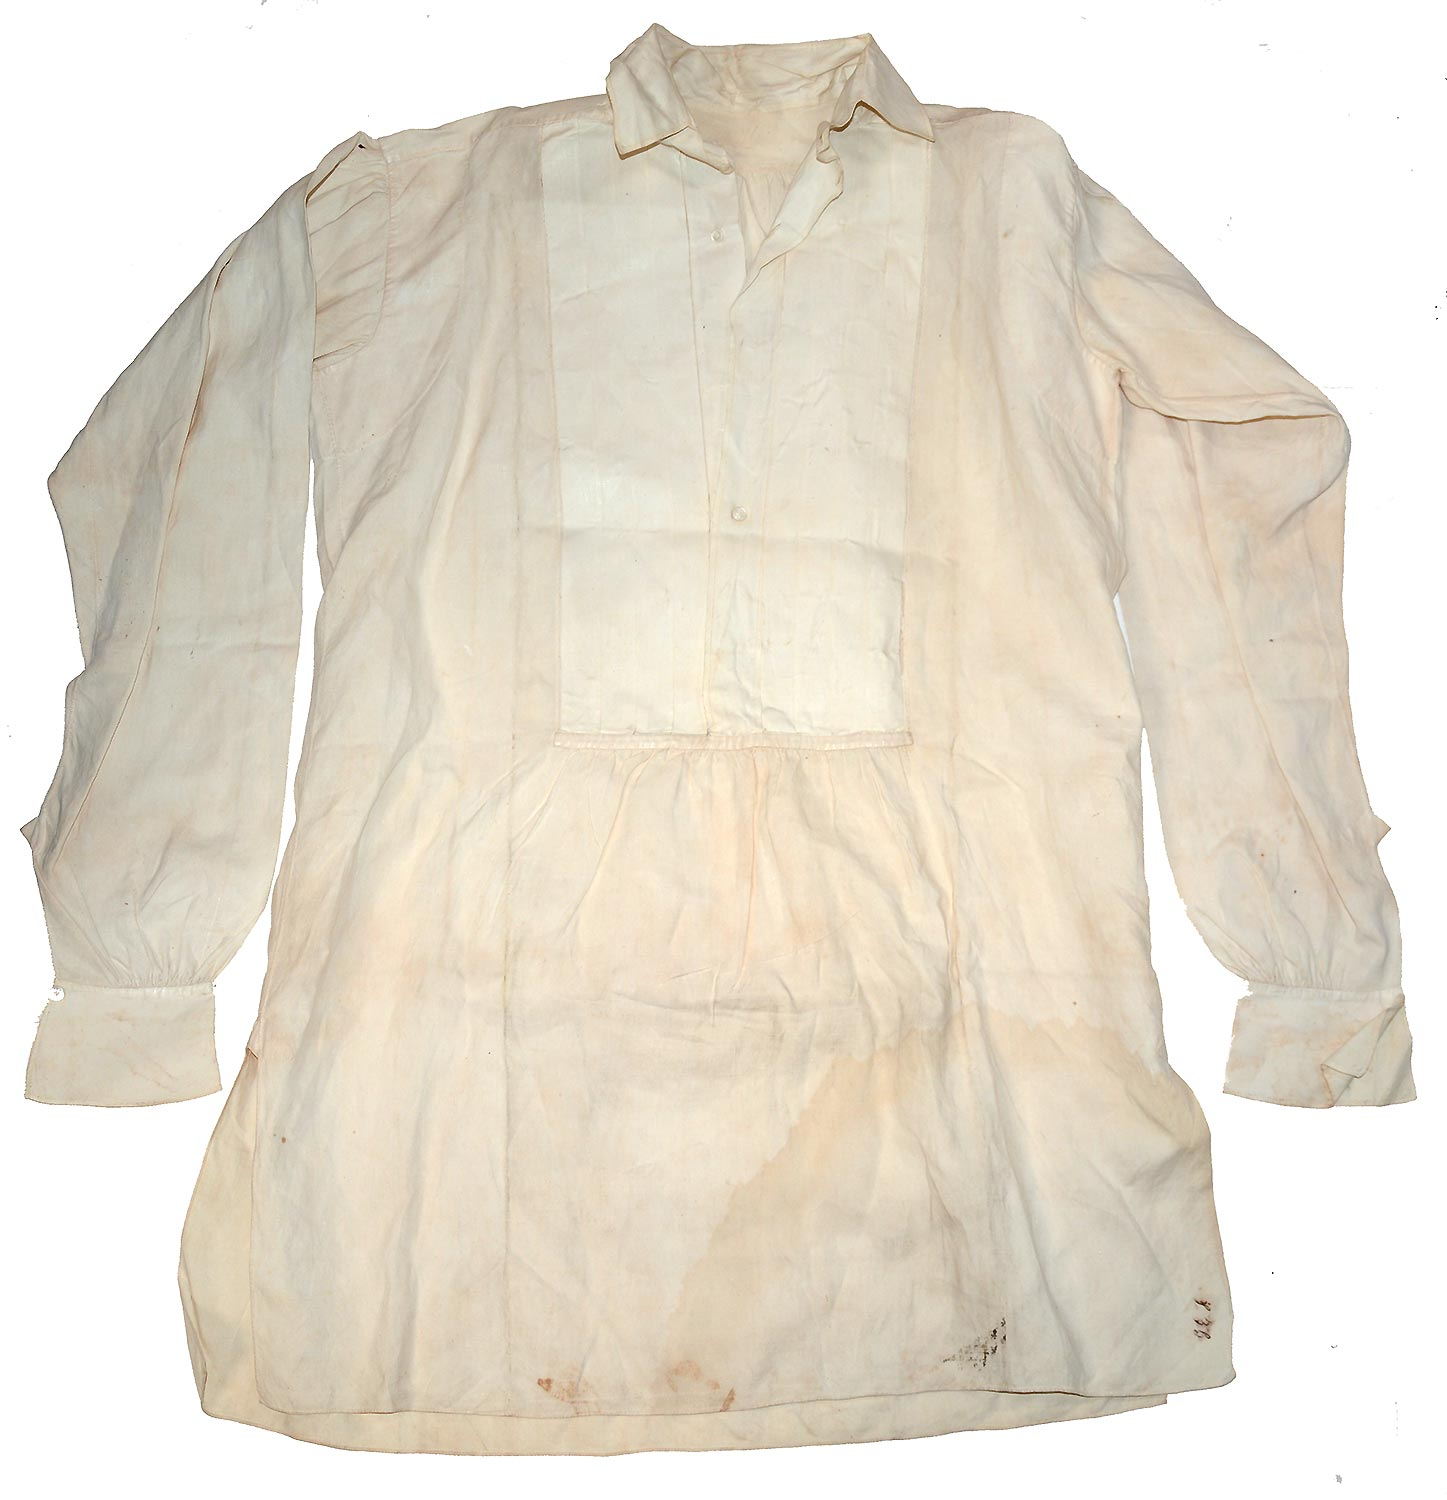 WHITE LINEN SHIRT IDENTIFIED TO CAPT. GEORGE FORDHAM, 3RD N.Y. INFANTRY